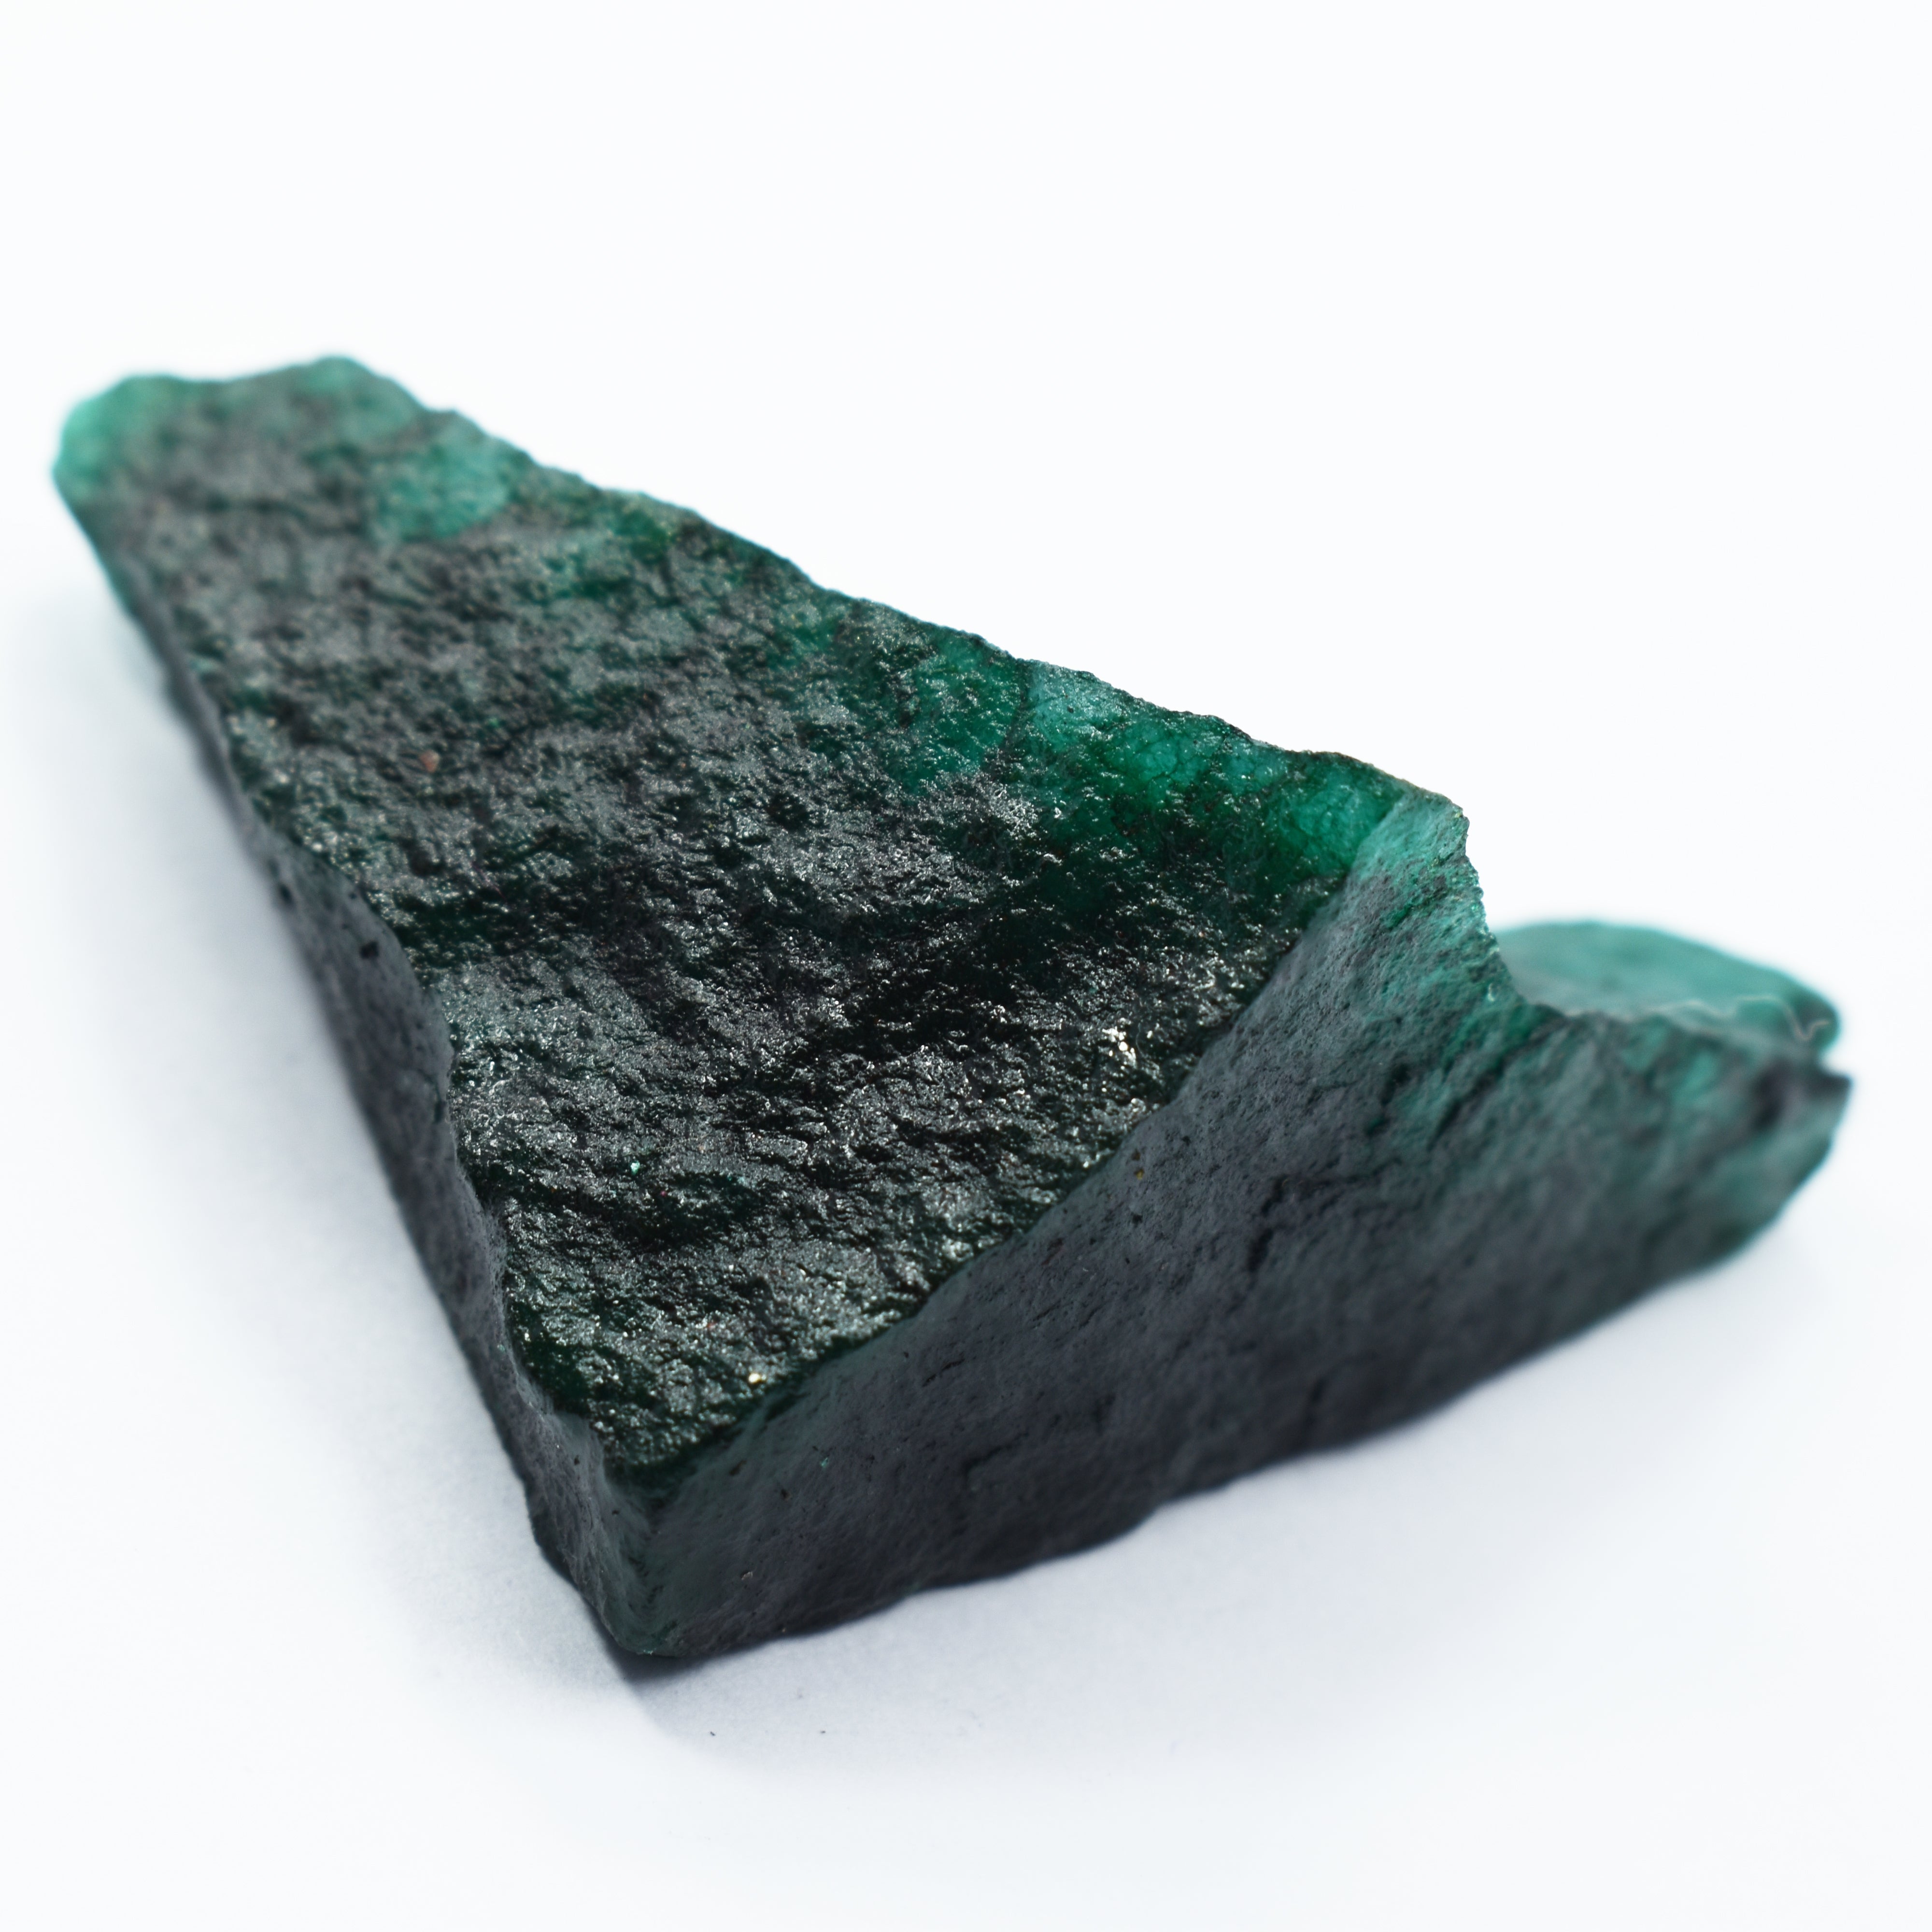 555.65 Ct Green Emerald Rough From Colombia Natural Certified Earth Mined Rough | Best For Versatility in Jewelry Design | Gift For Your Friends